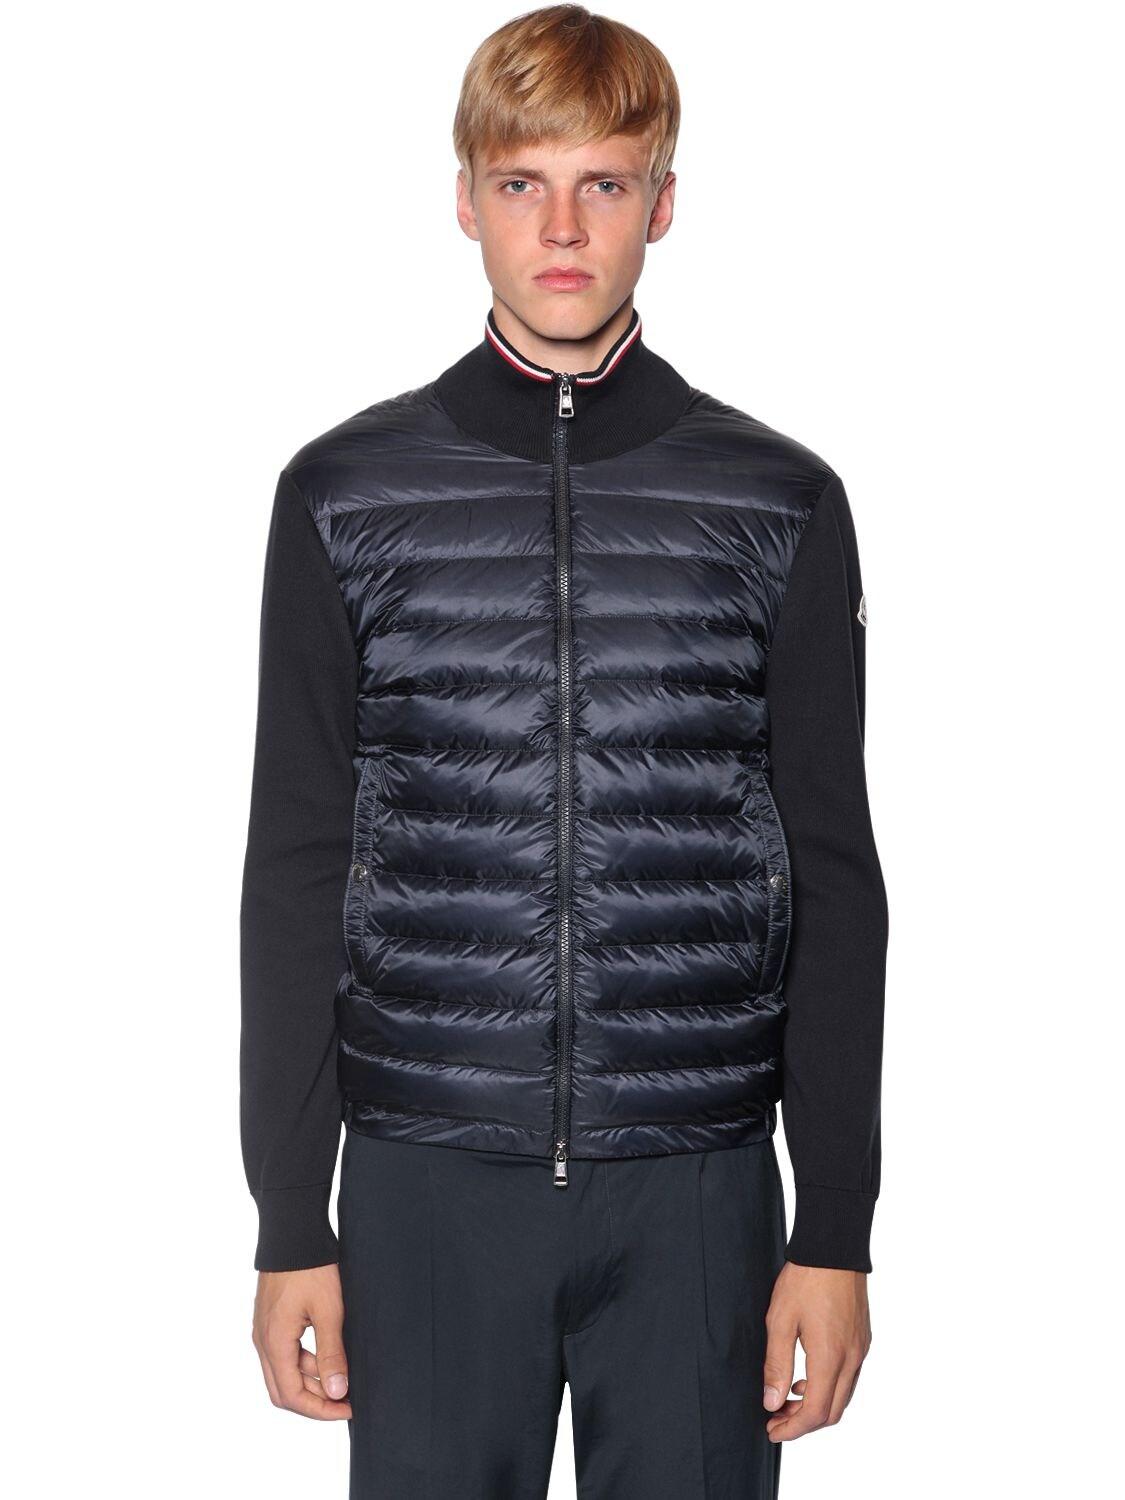 Moncler Synthetic Nylon Tricot Down Sweater in Navy (Blue) for Men - Lyst